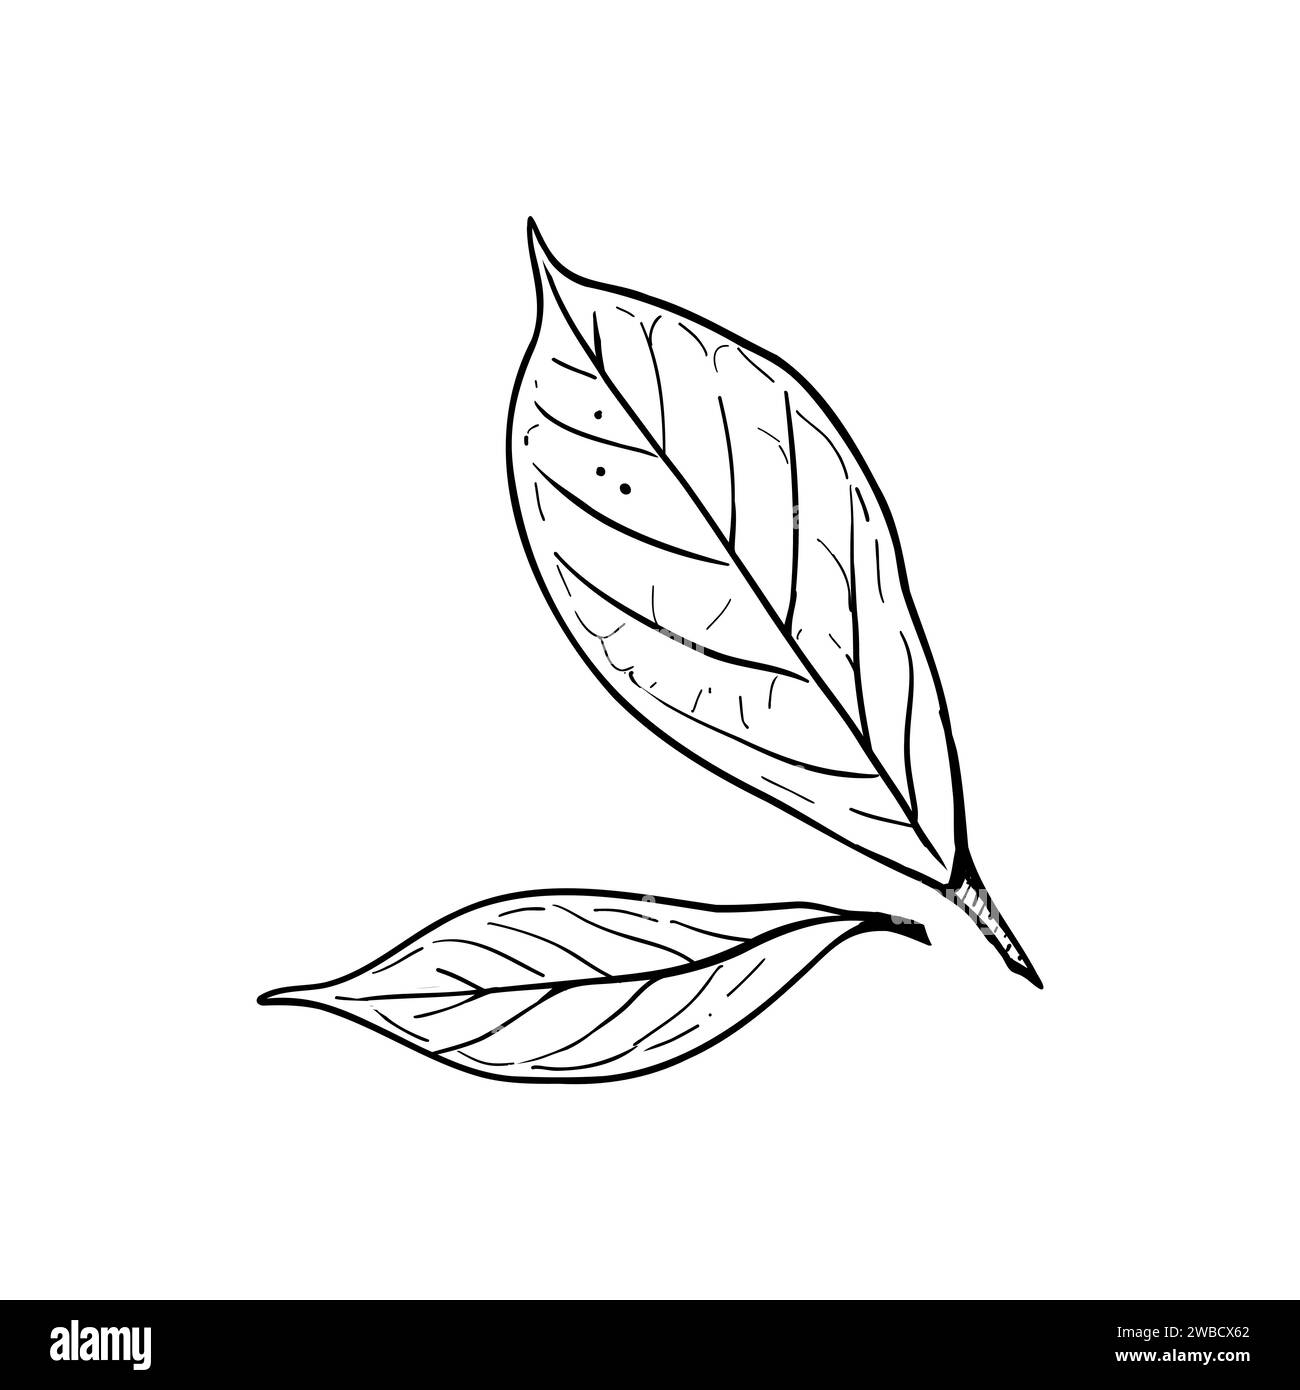 Avocado leaves vector illustration. Persea tree leaf. Black outline graphic drawing. Tropical foliage ink contour. Black line silhouette Stock Vector